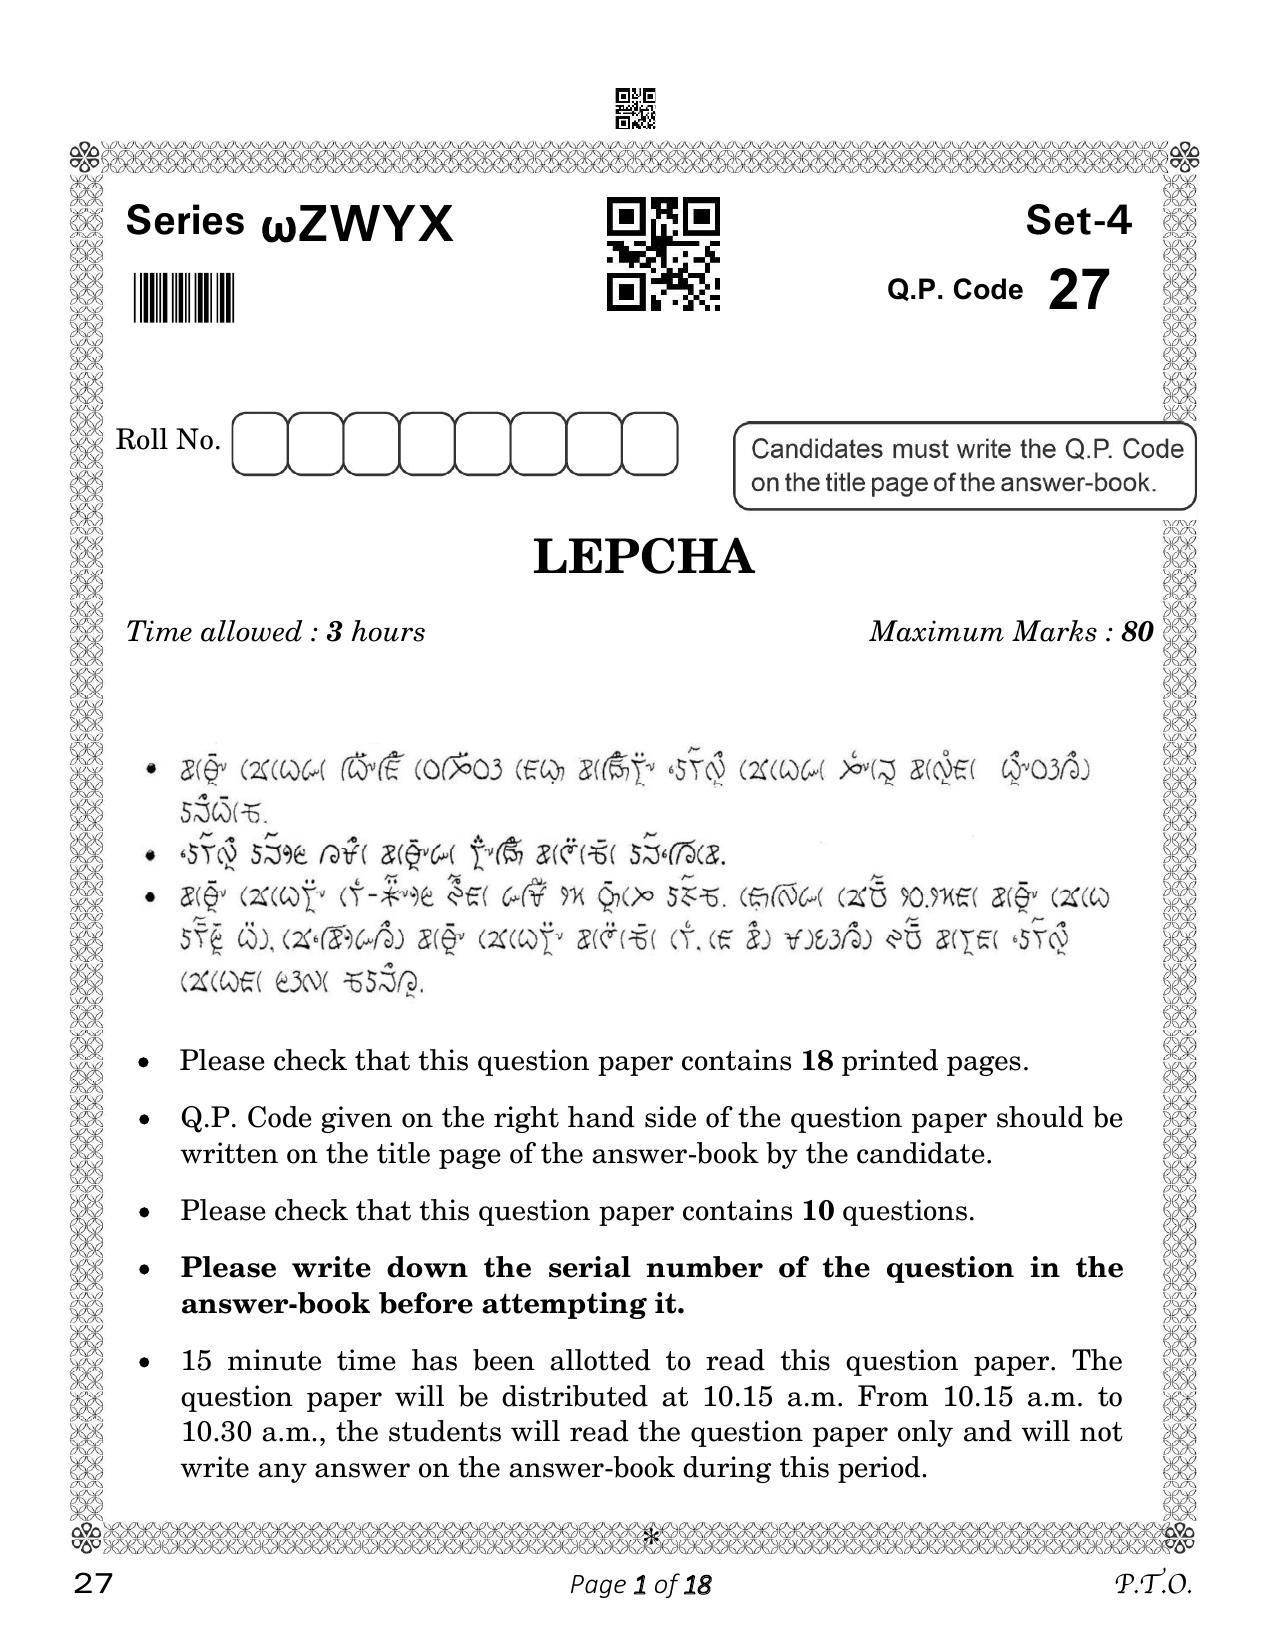 CBSE Class 10 27_Lepcha 2023 Question Paper - Page 1